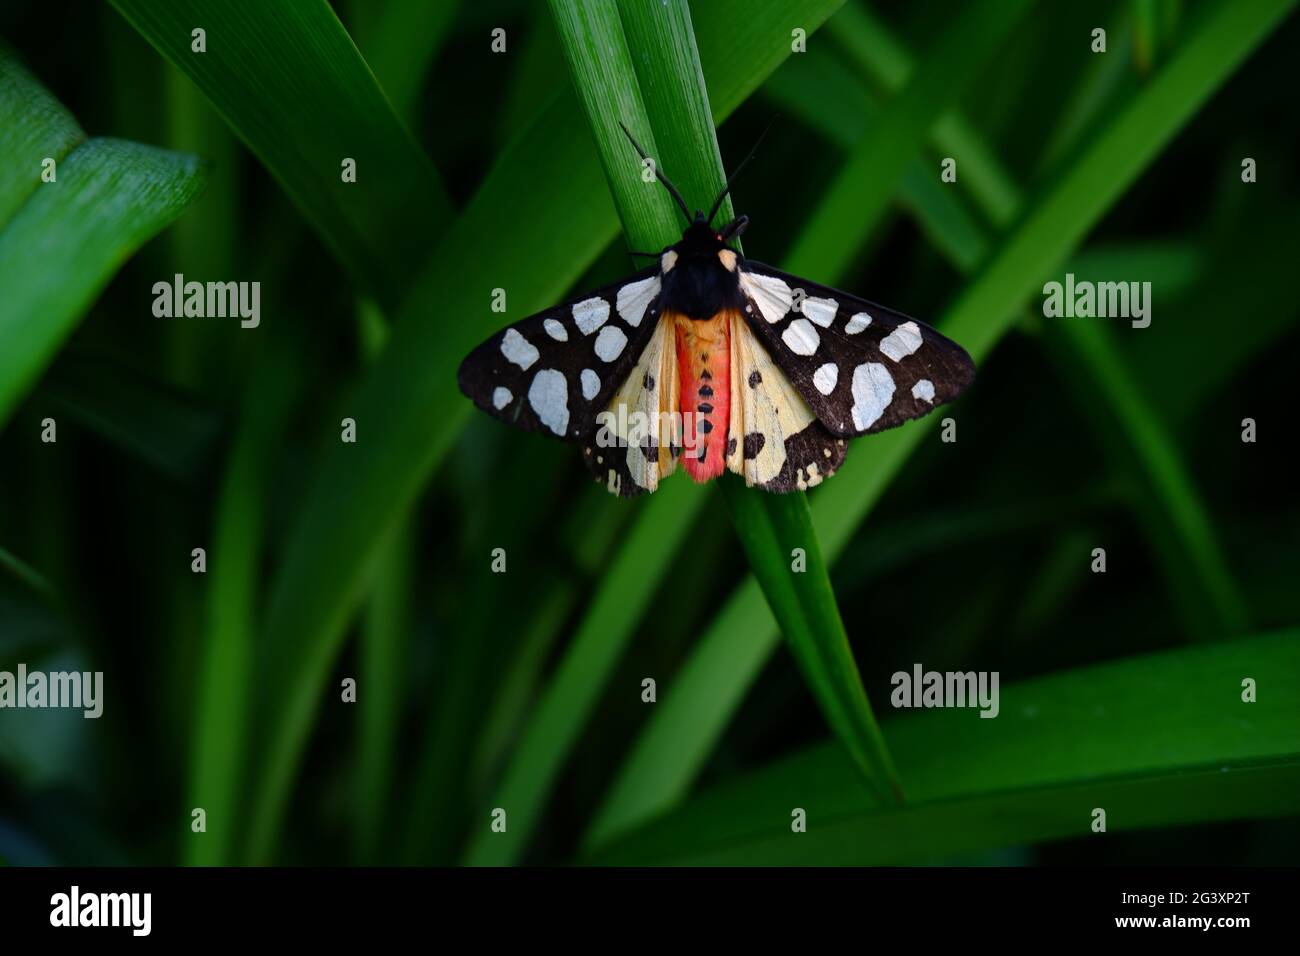 Mottled butterfly. A colorful live butterfly sits on a green lily leaf. Stock Photo